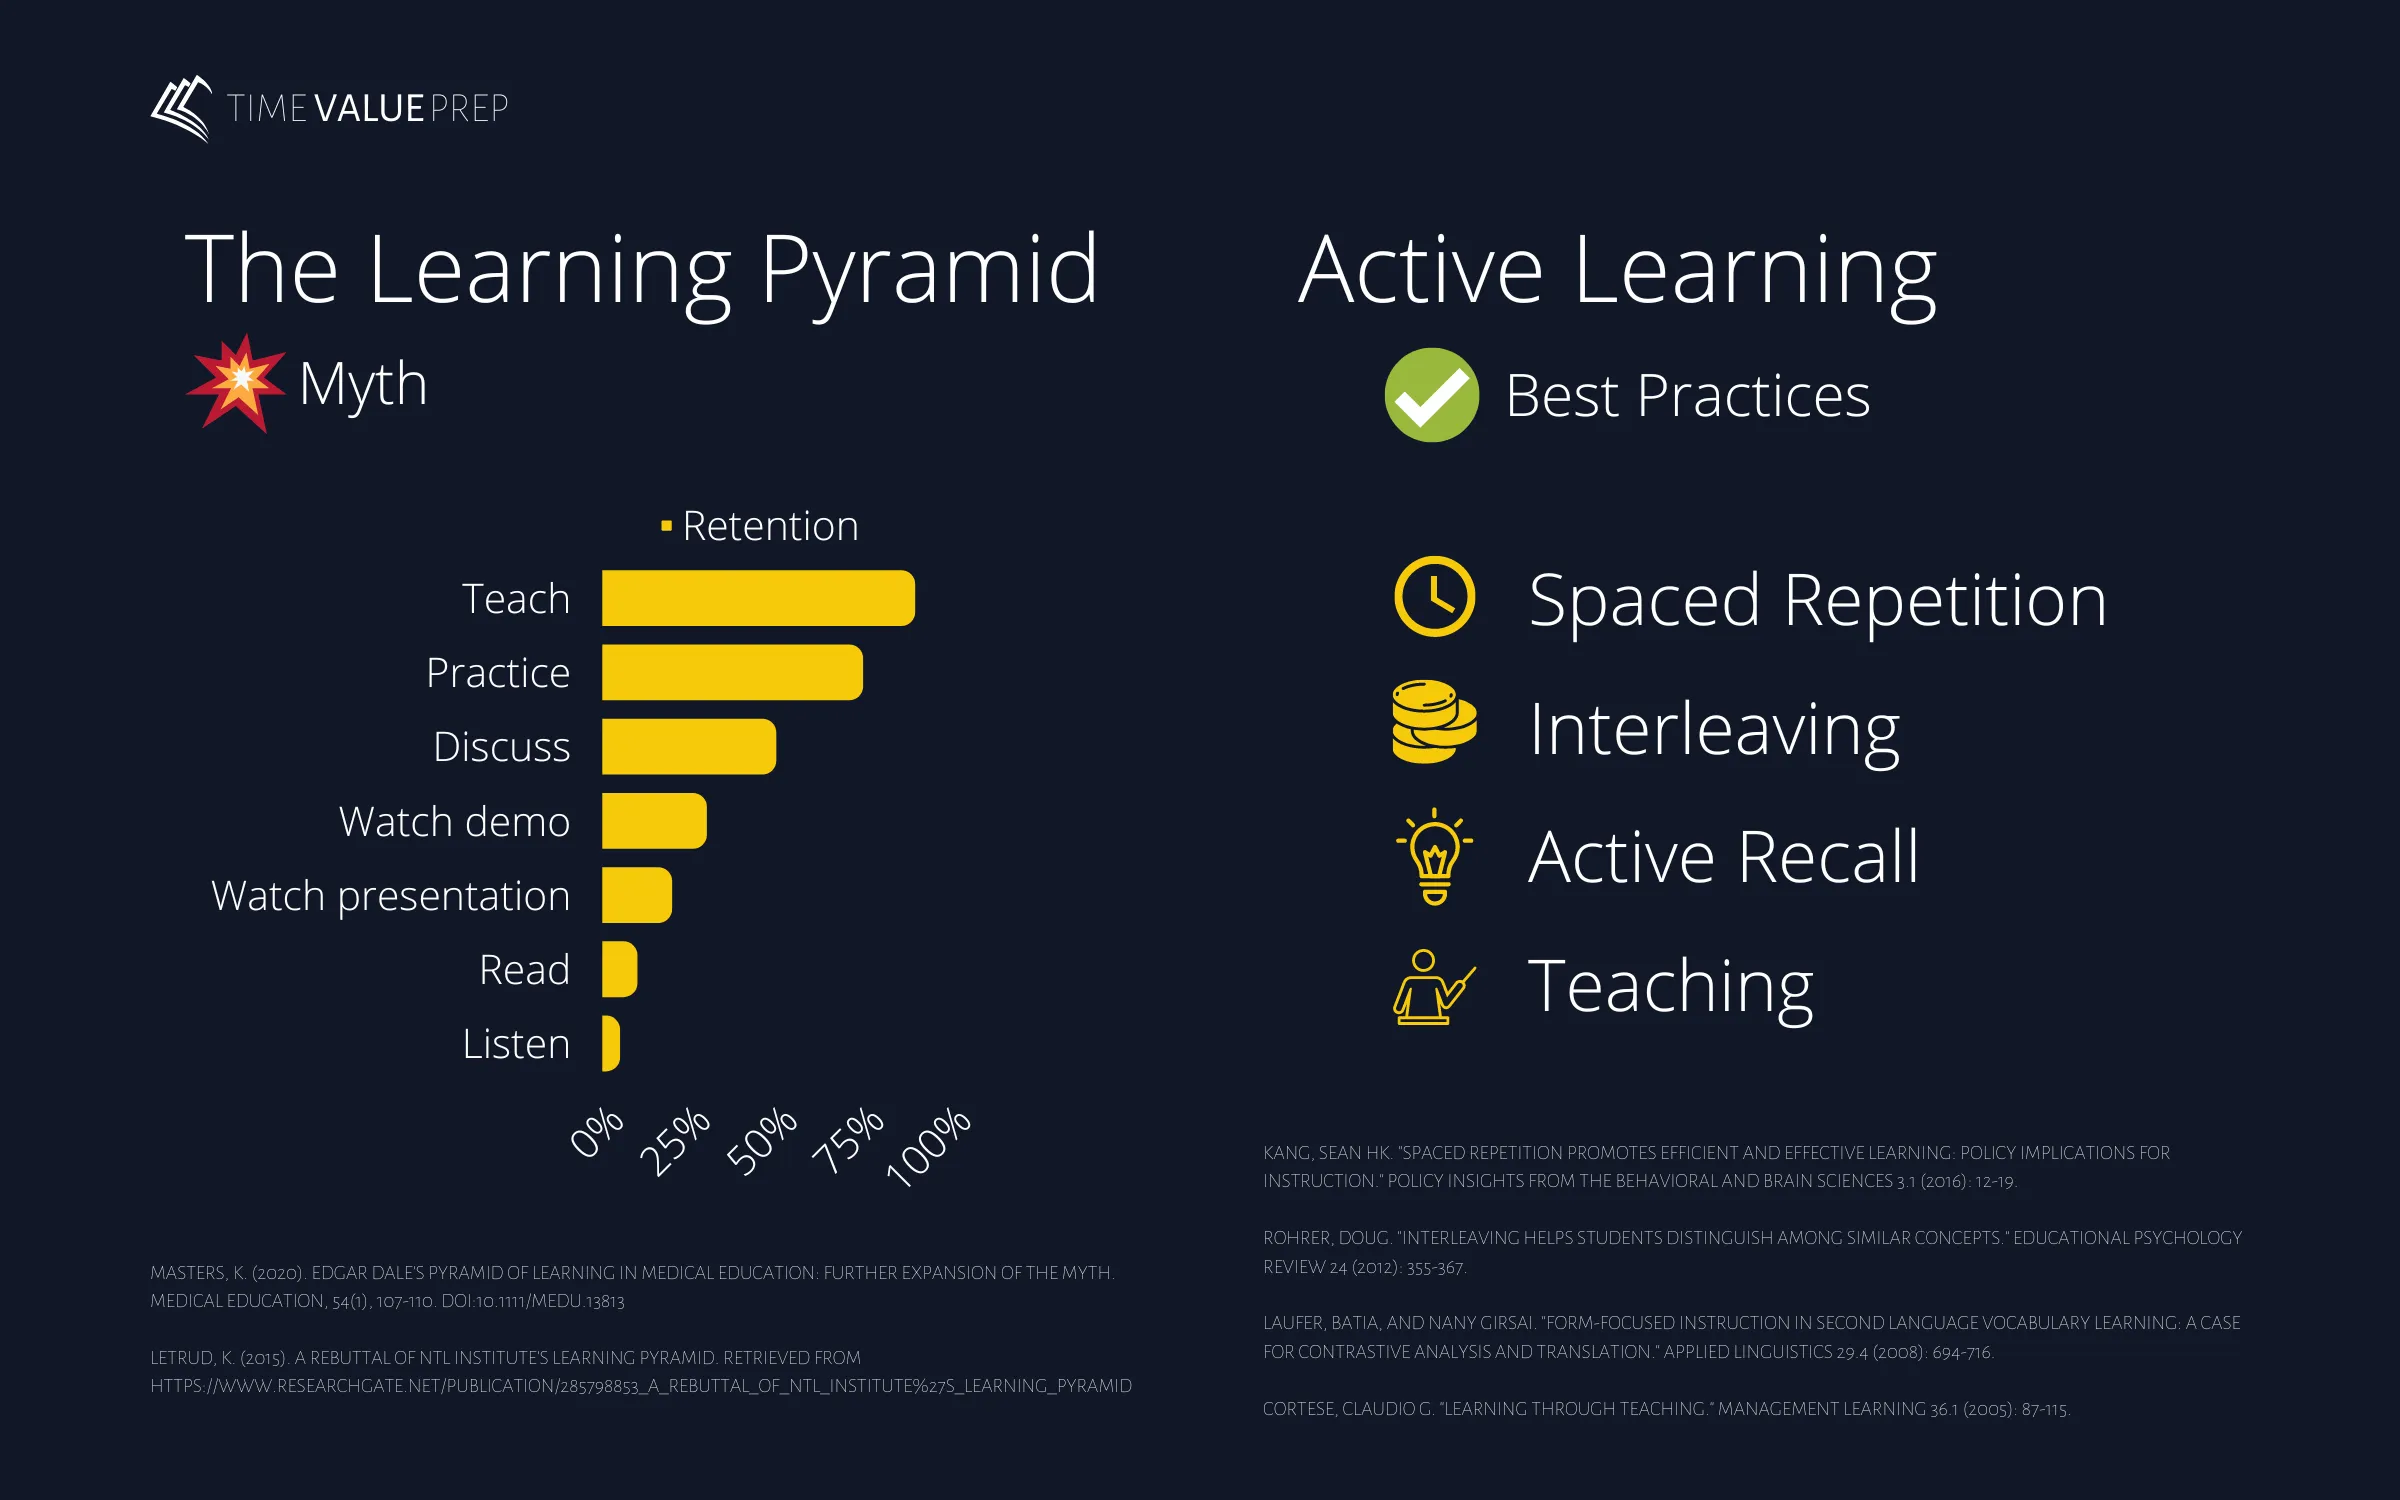 An image comparing The Learning Pyramid to Active Learning Techniques